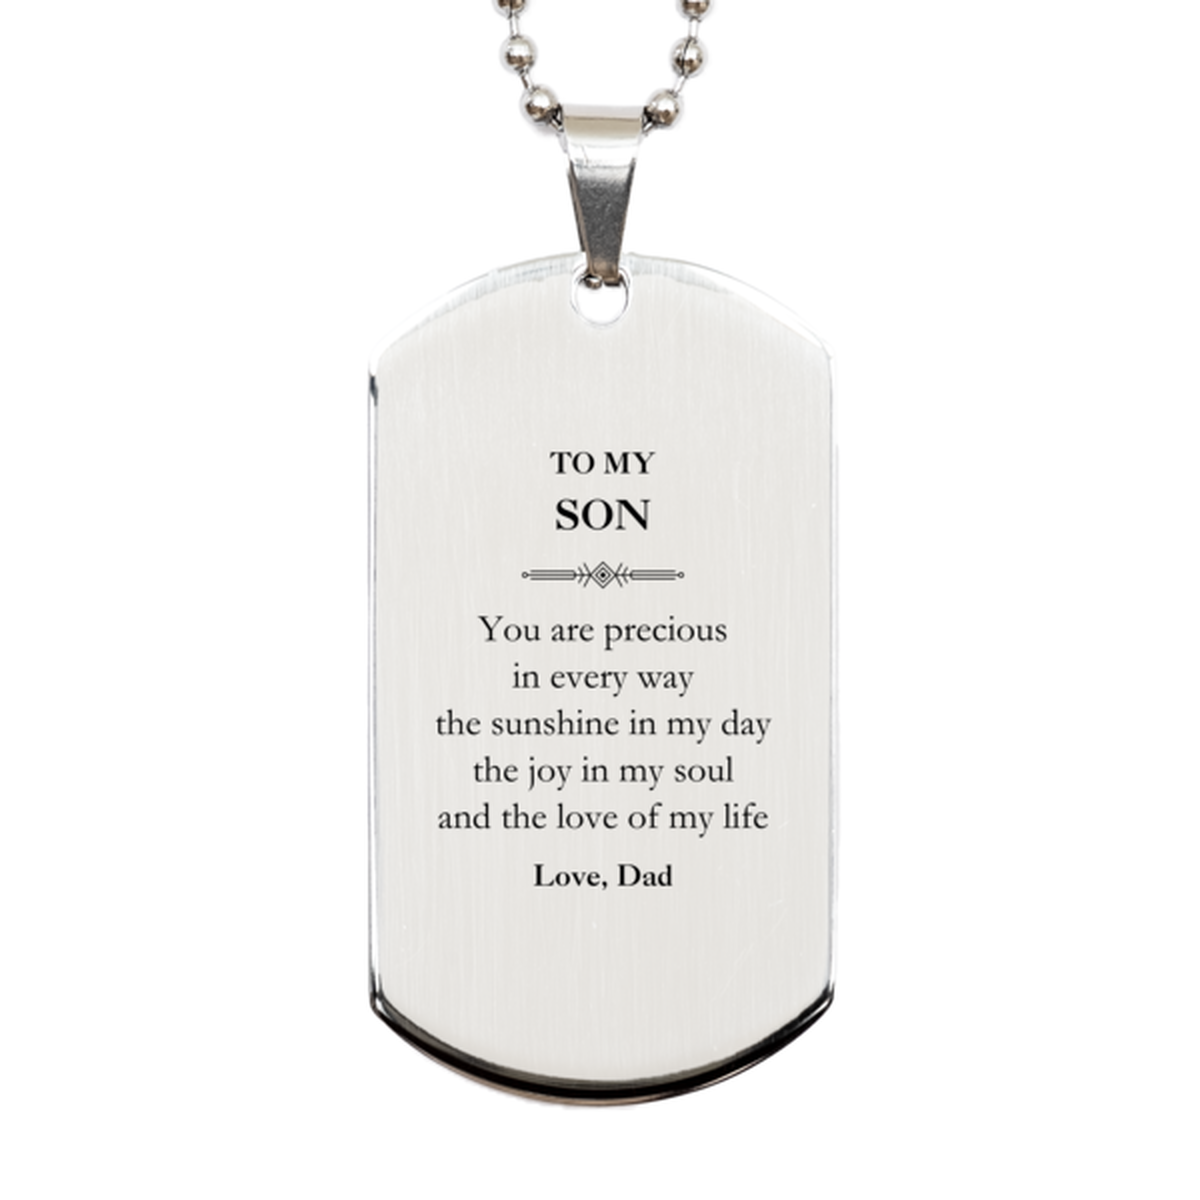 Graduation Gifts for Son Silver Dog Tag Present from Dad, Christmas Son Birthday Gifts Son You are precious in every way the sunshine in my day. Love, Dad